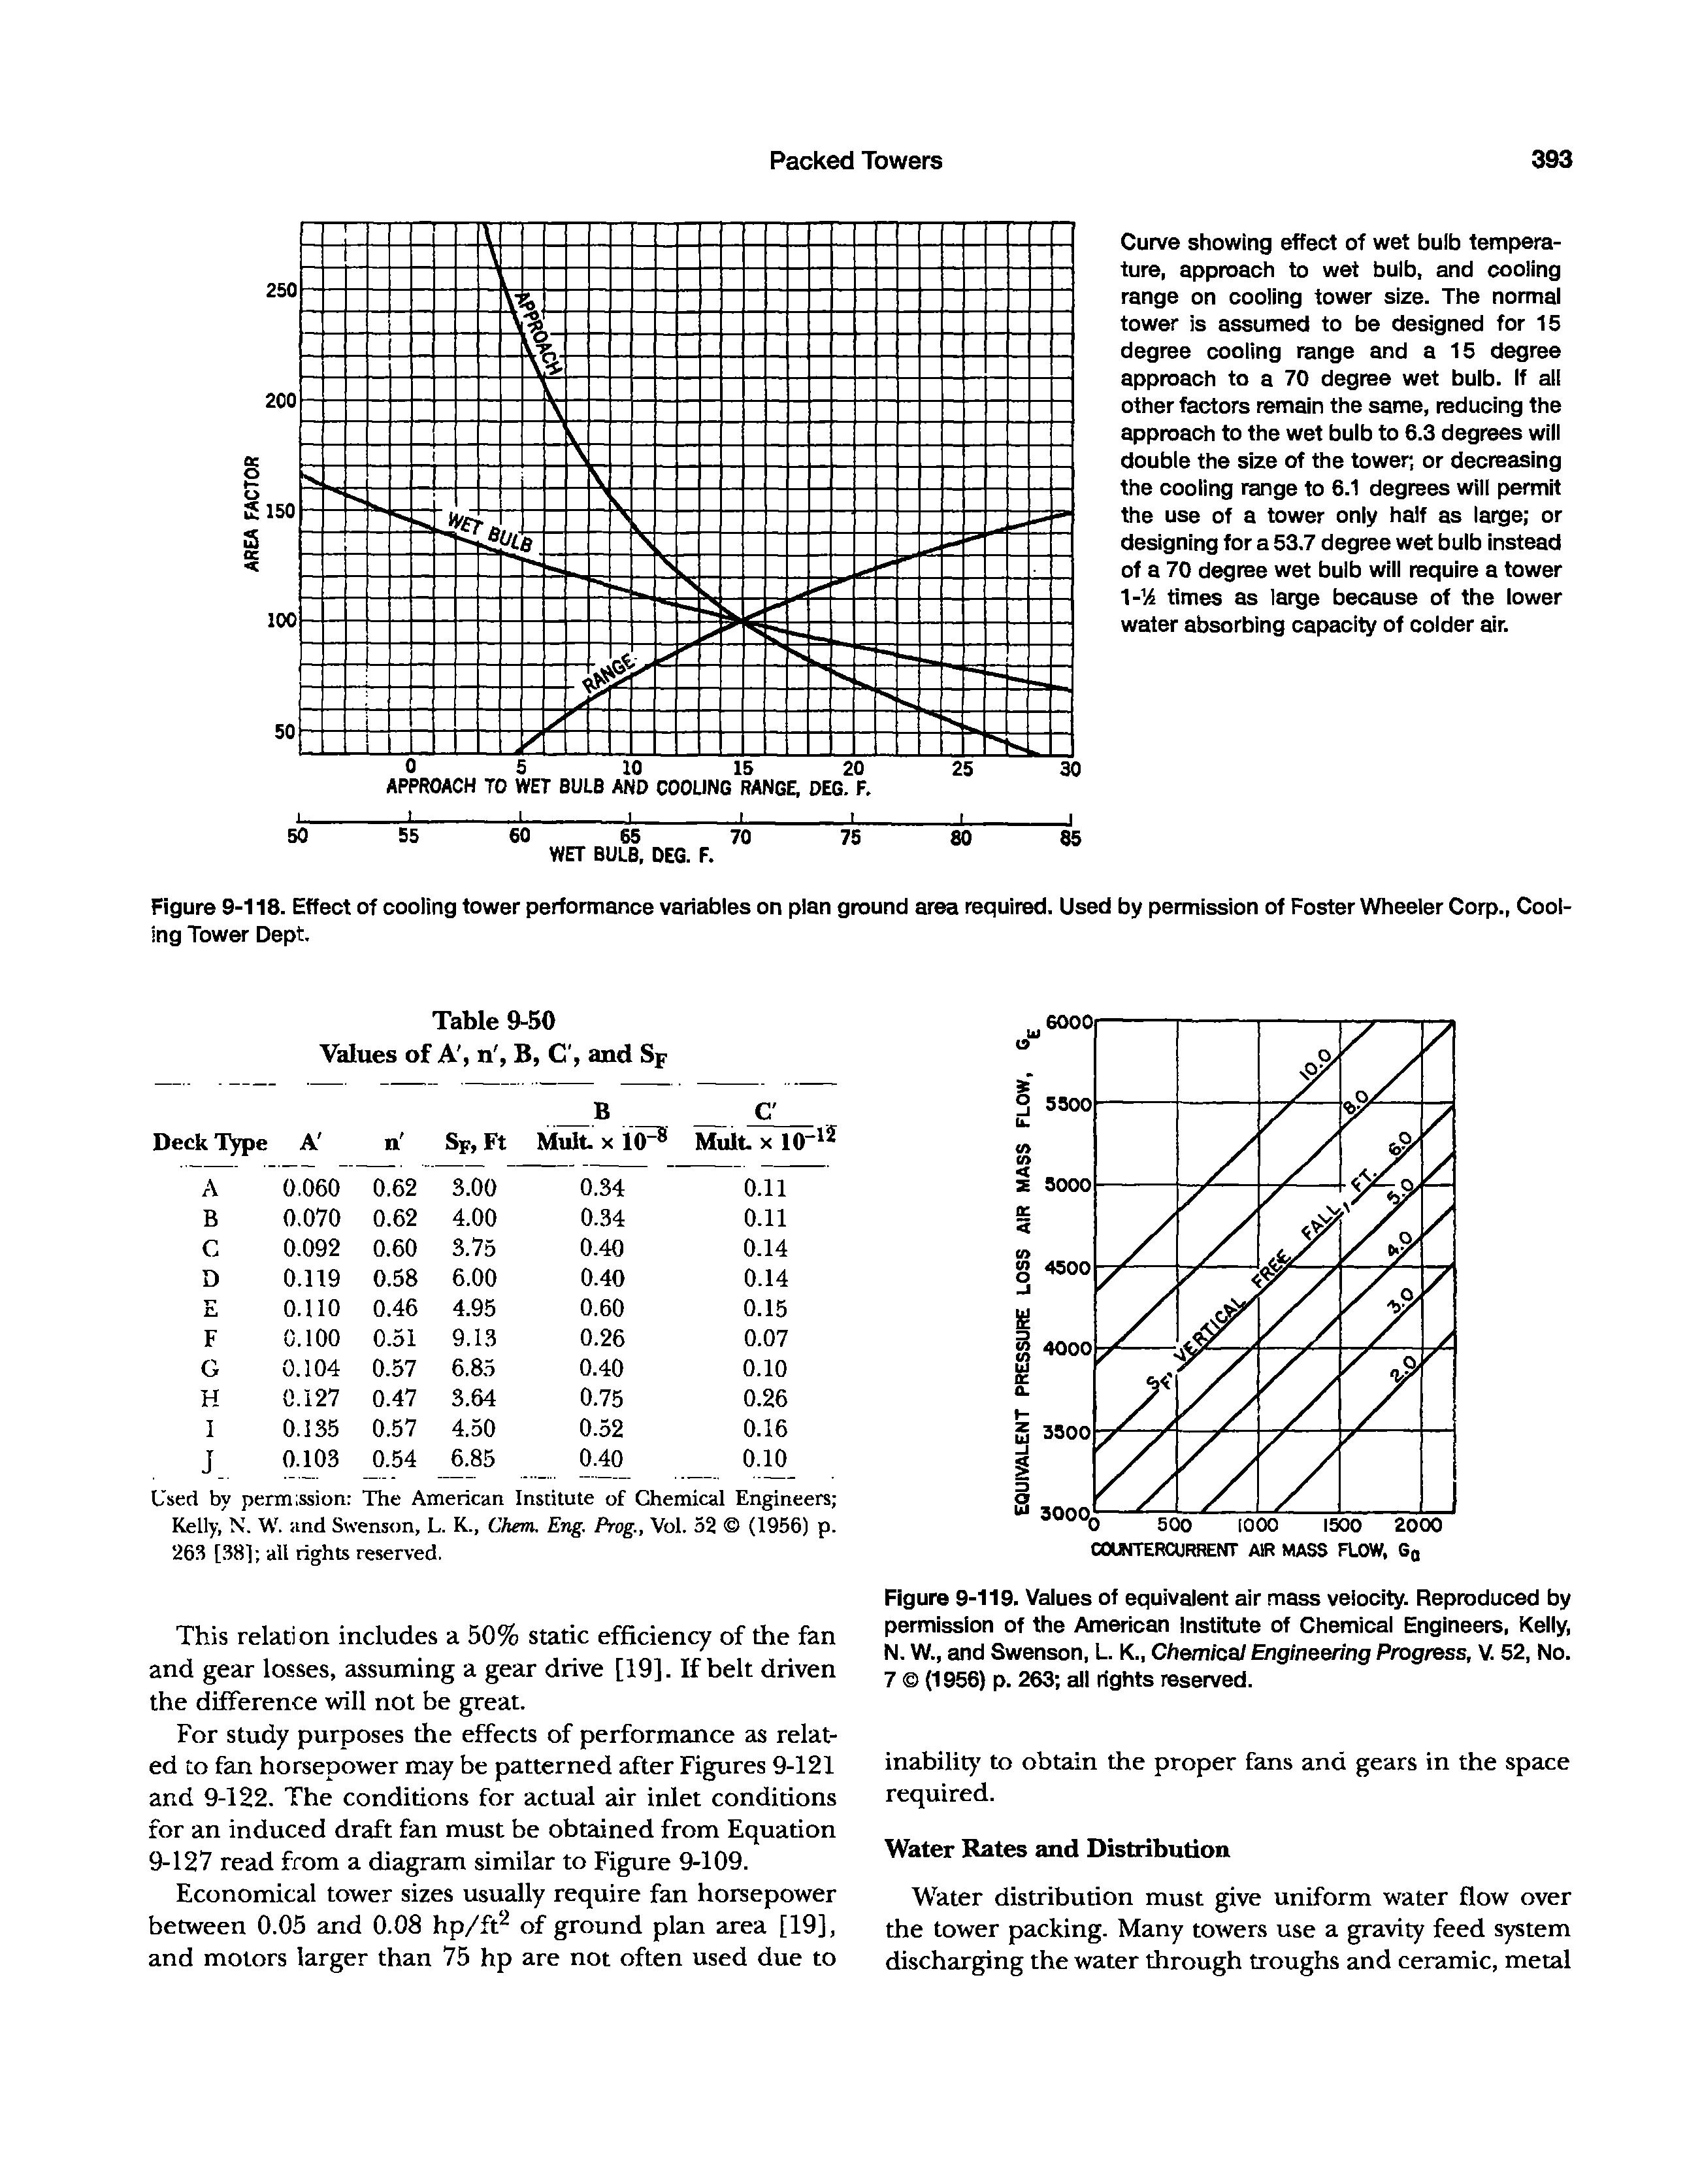 Figure 9-118. Effect of cooling tower performance variables on plan ground area required. Used by permission of Foster Wheeler Corp., Cooling Tower Dept.